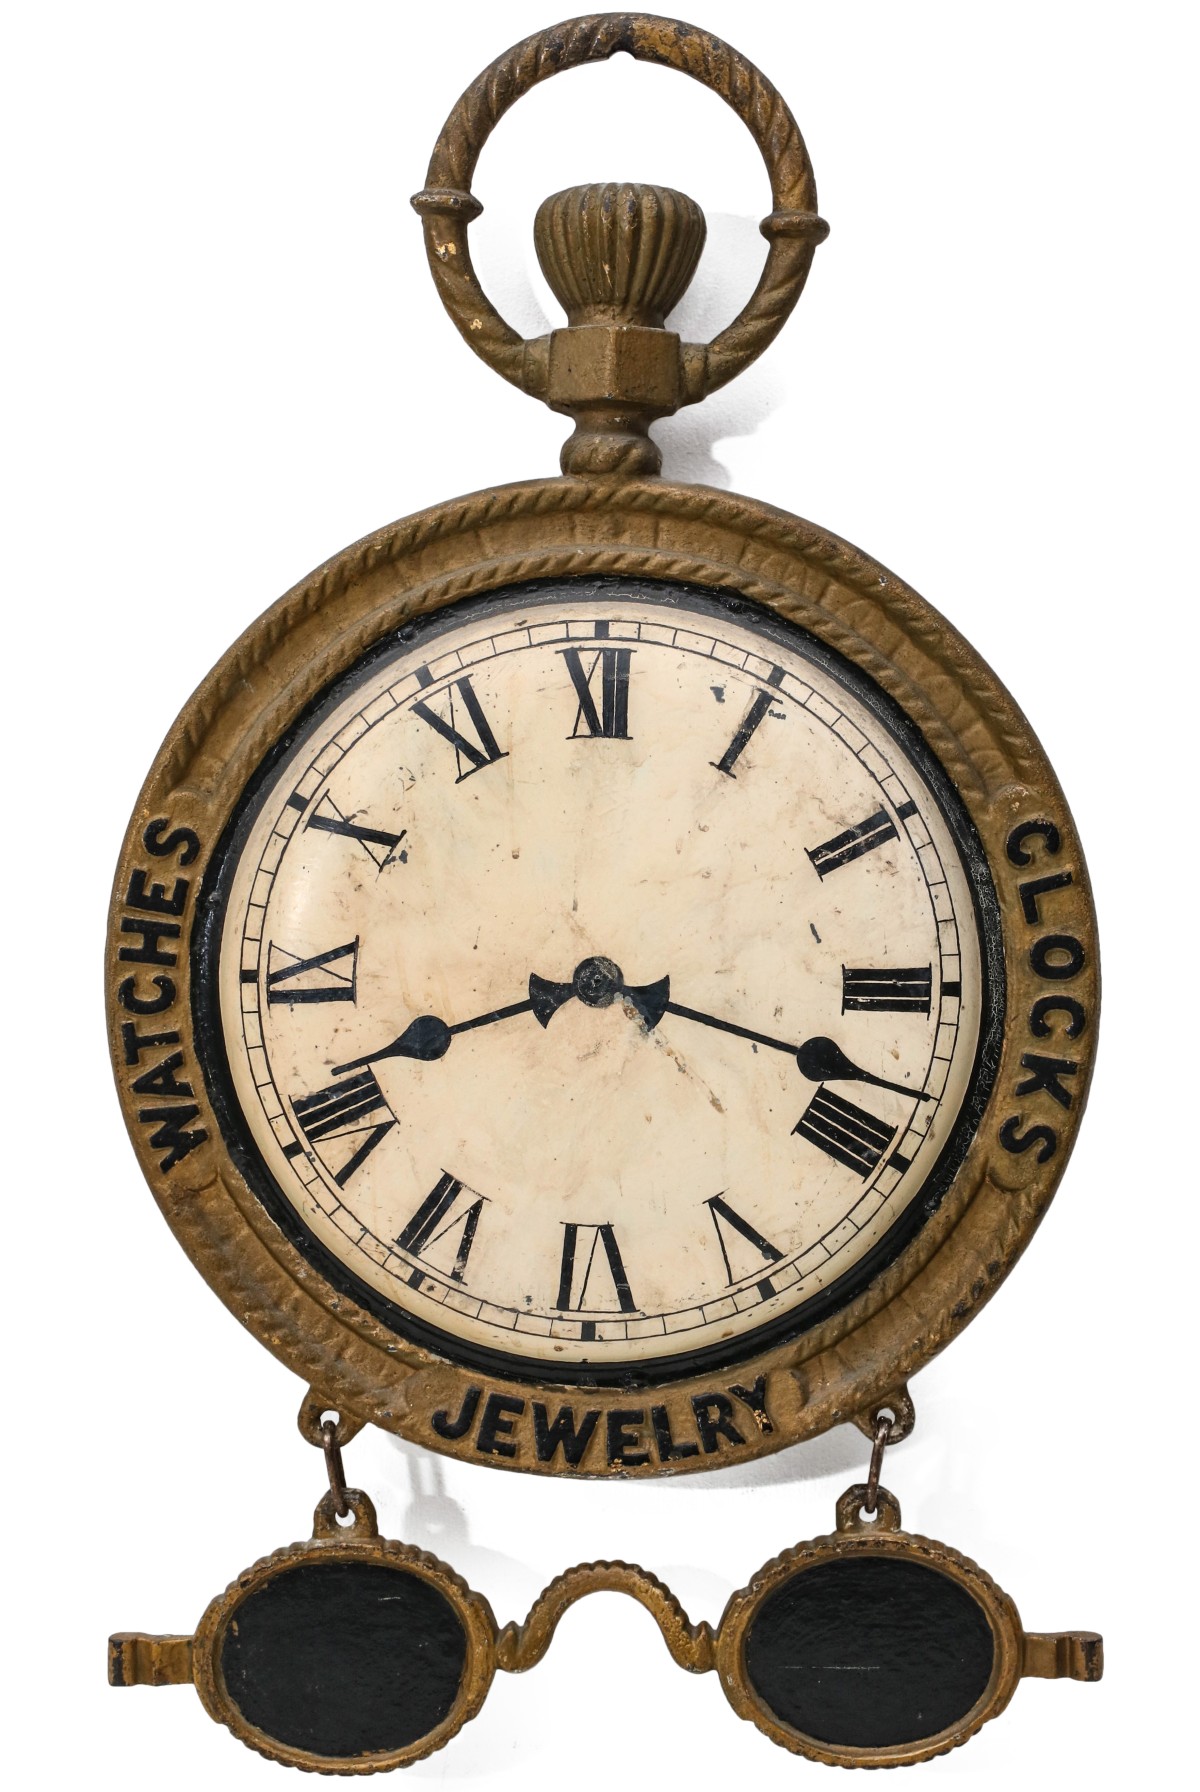 A GOOD WATCHMAKER'S TRADE SIGN WITH FIGURAL SPECTACLES